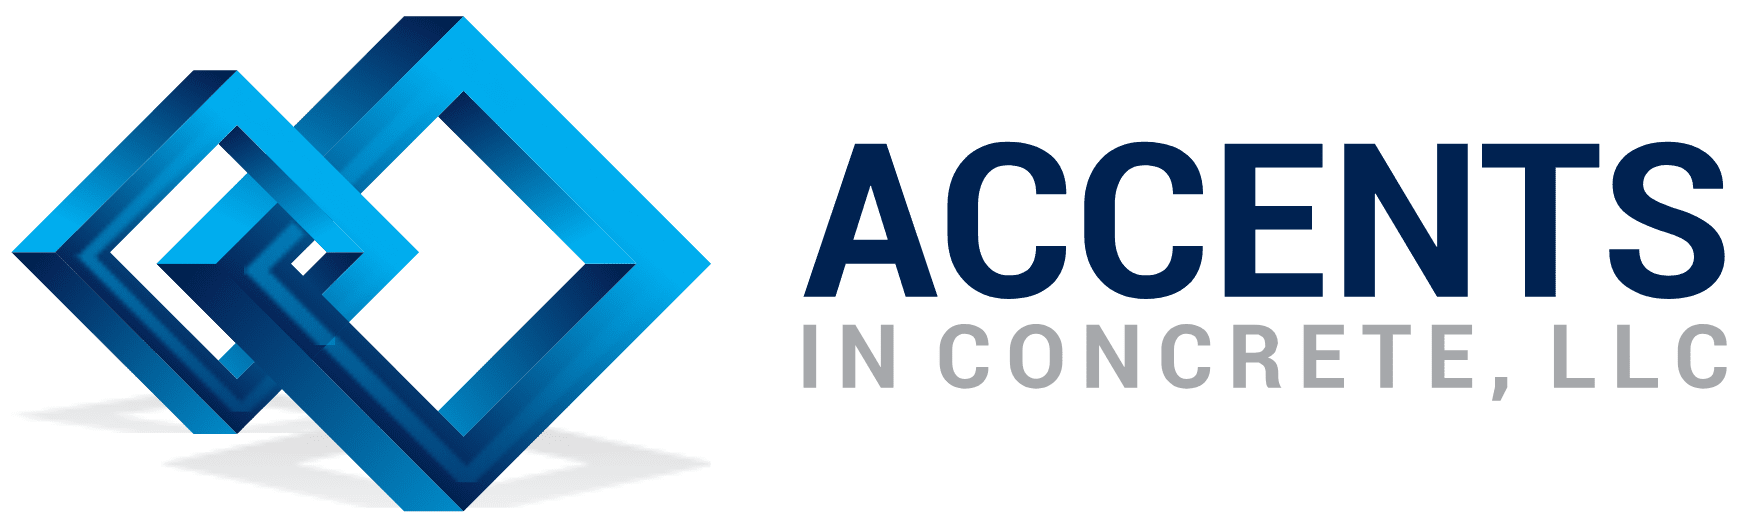 Logo of accents in concrete, llc featuring a stylized blue double diamond shape with the company name to the right.